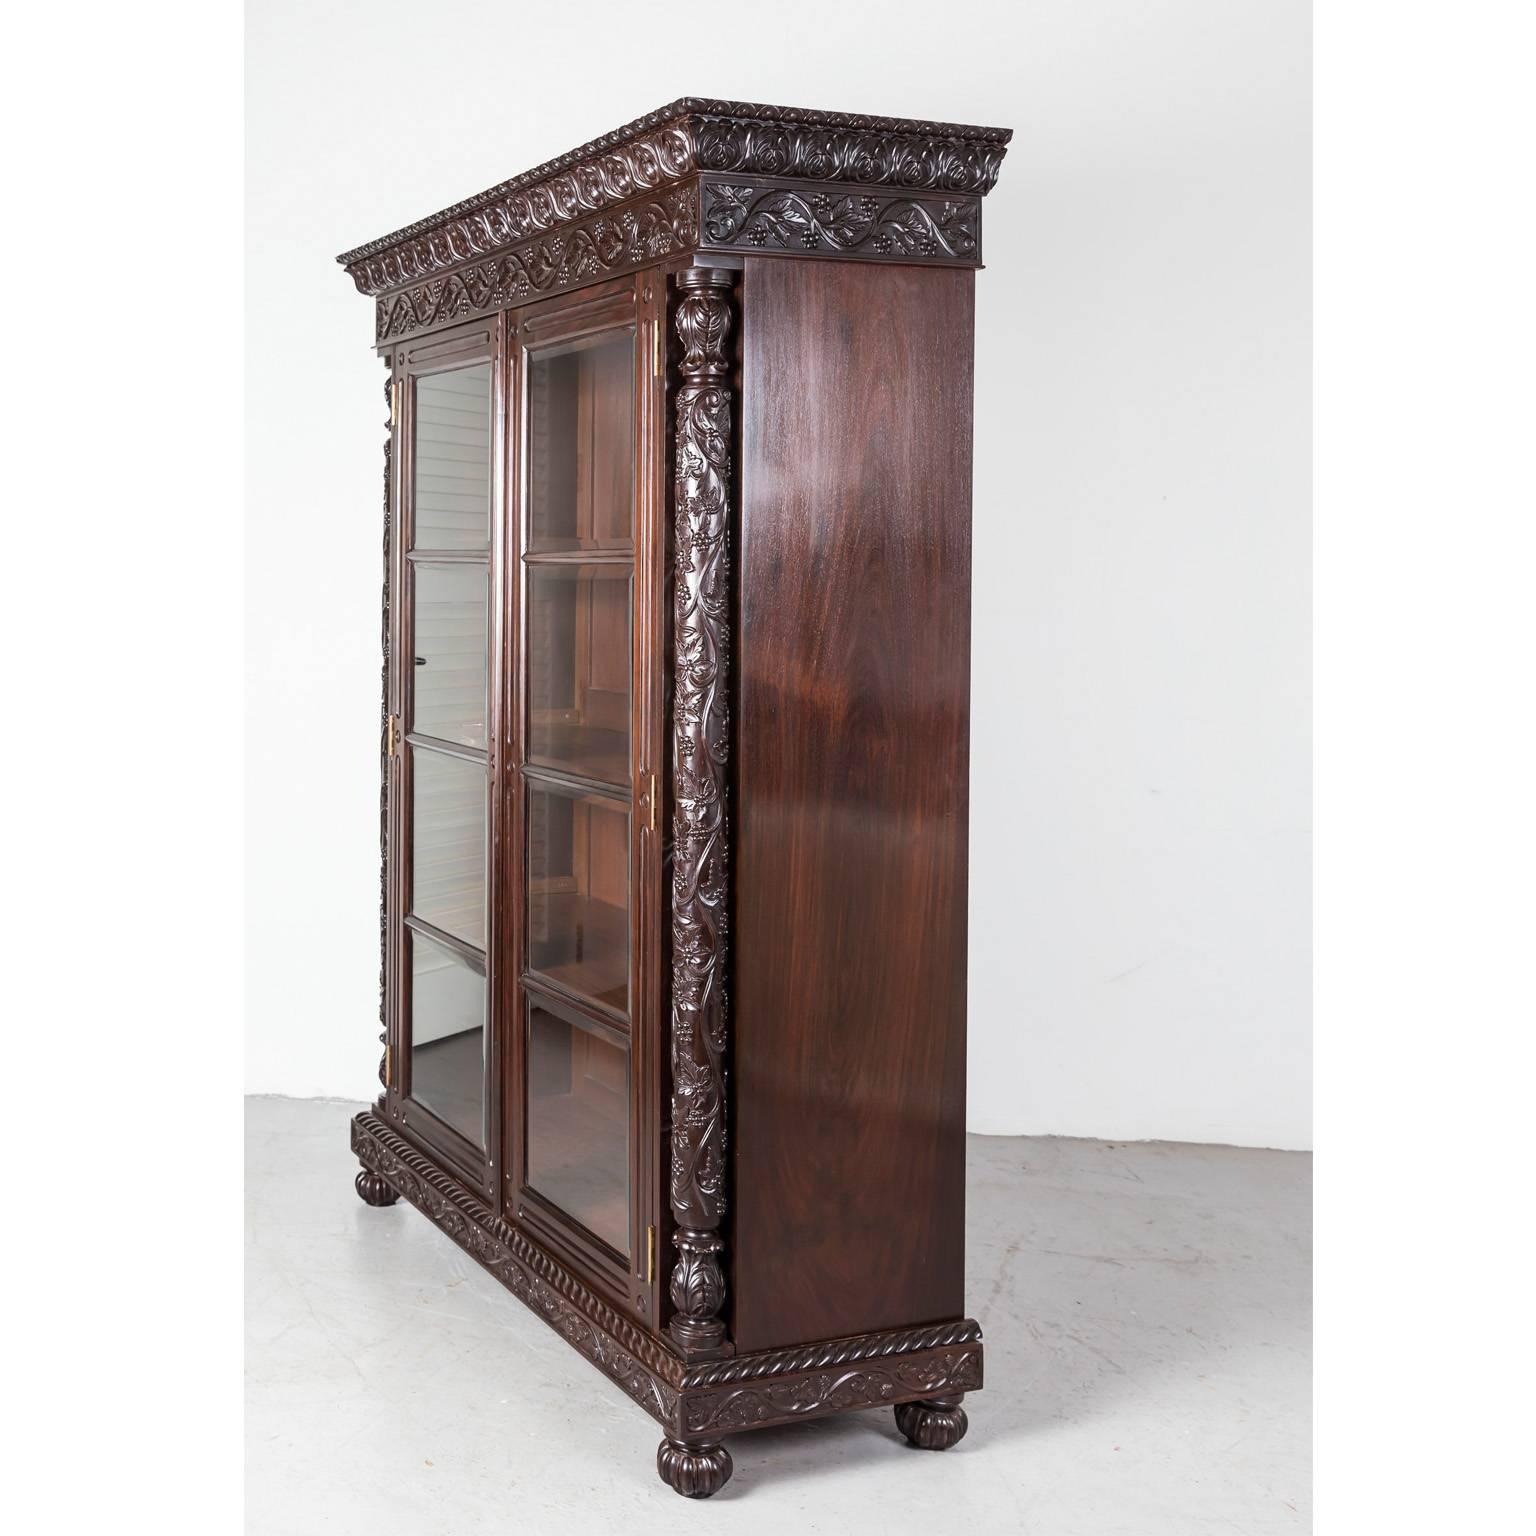 19th Century Antique Anglo-Indian or British Colonial Rosewood Glass Front Cabinet